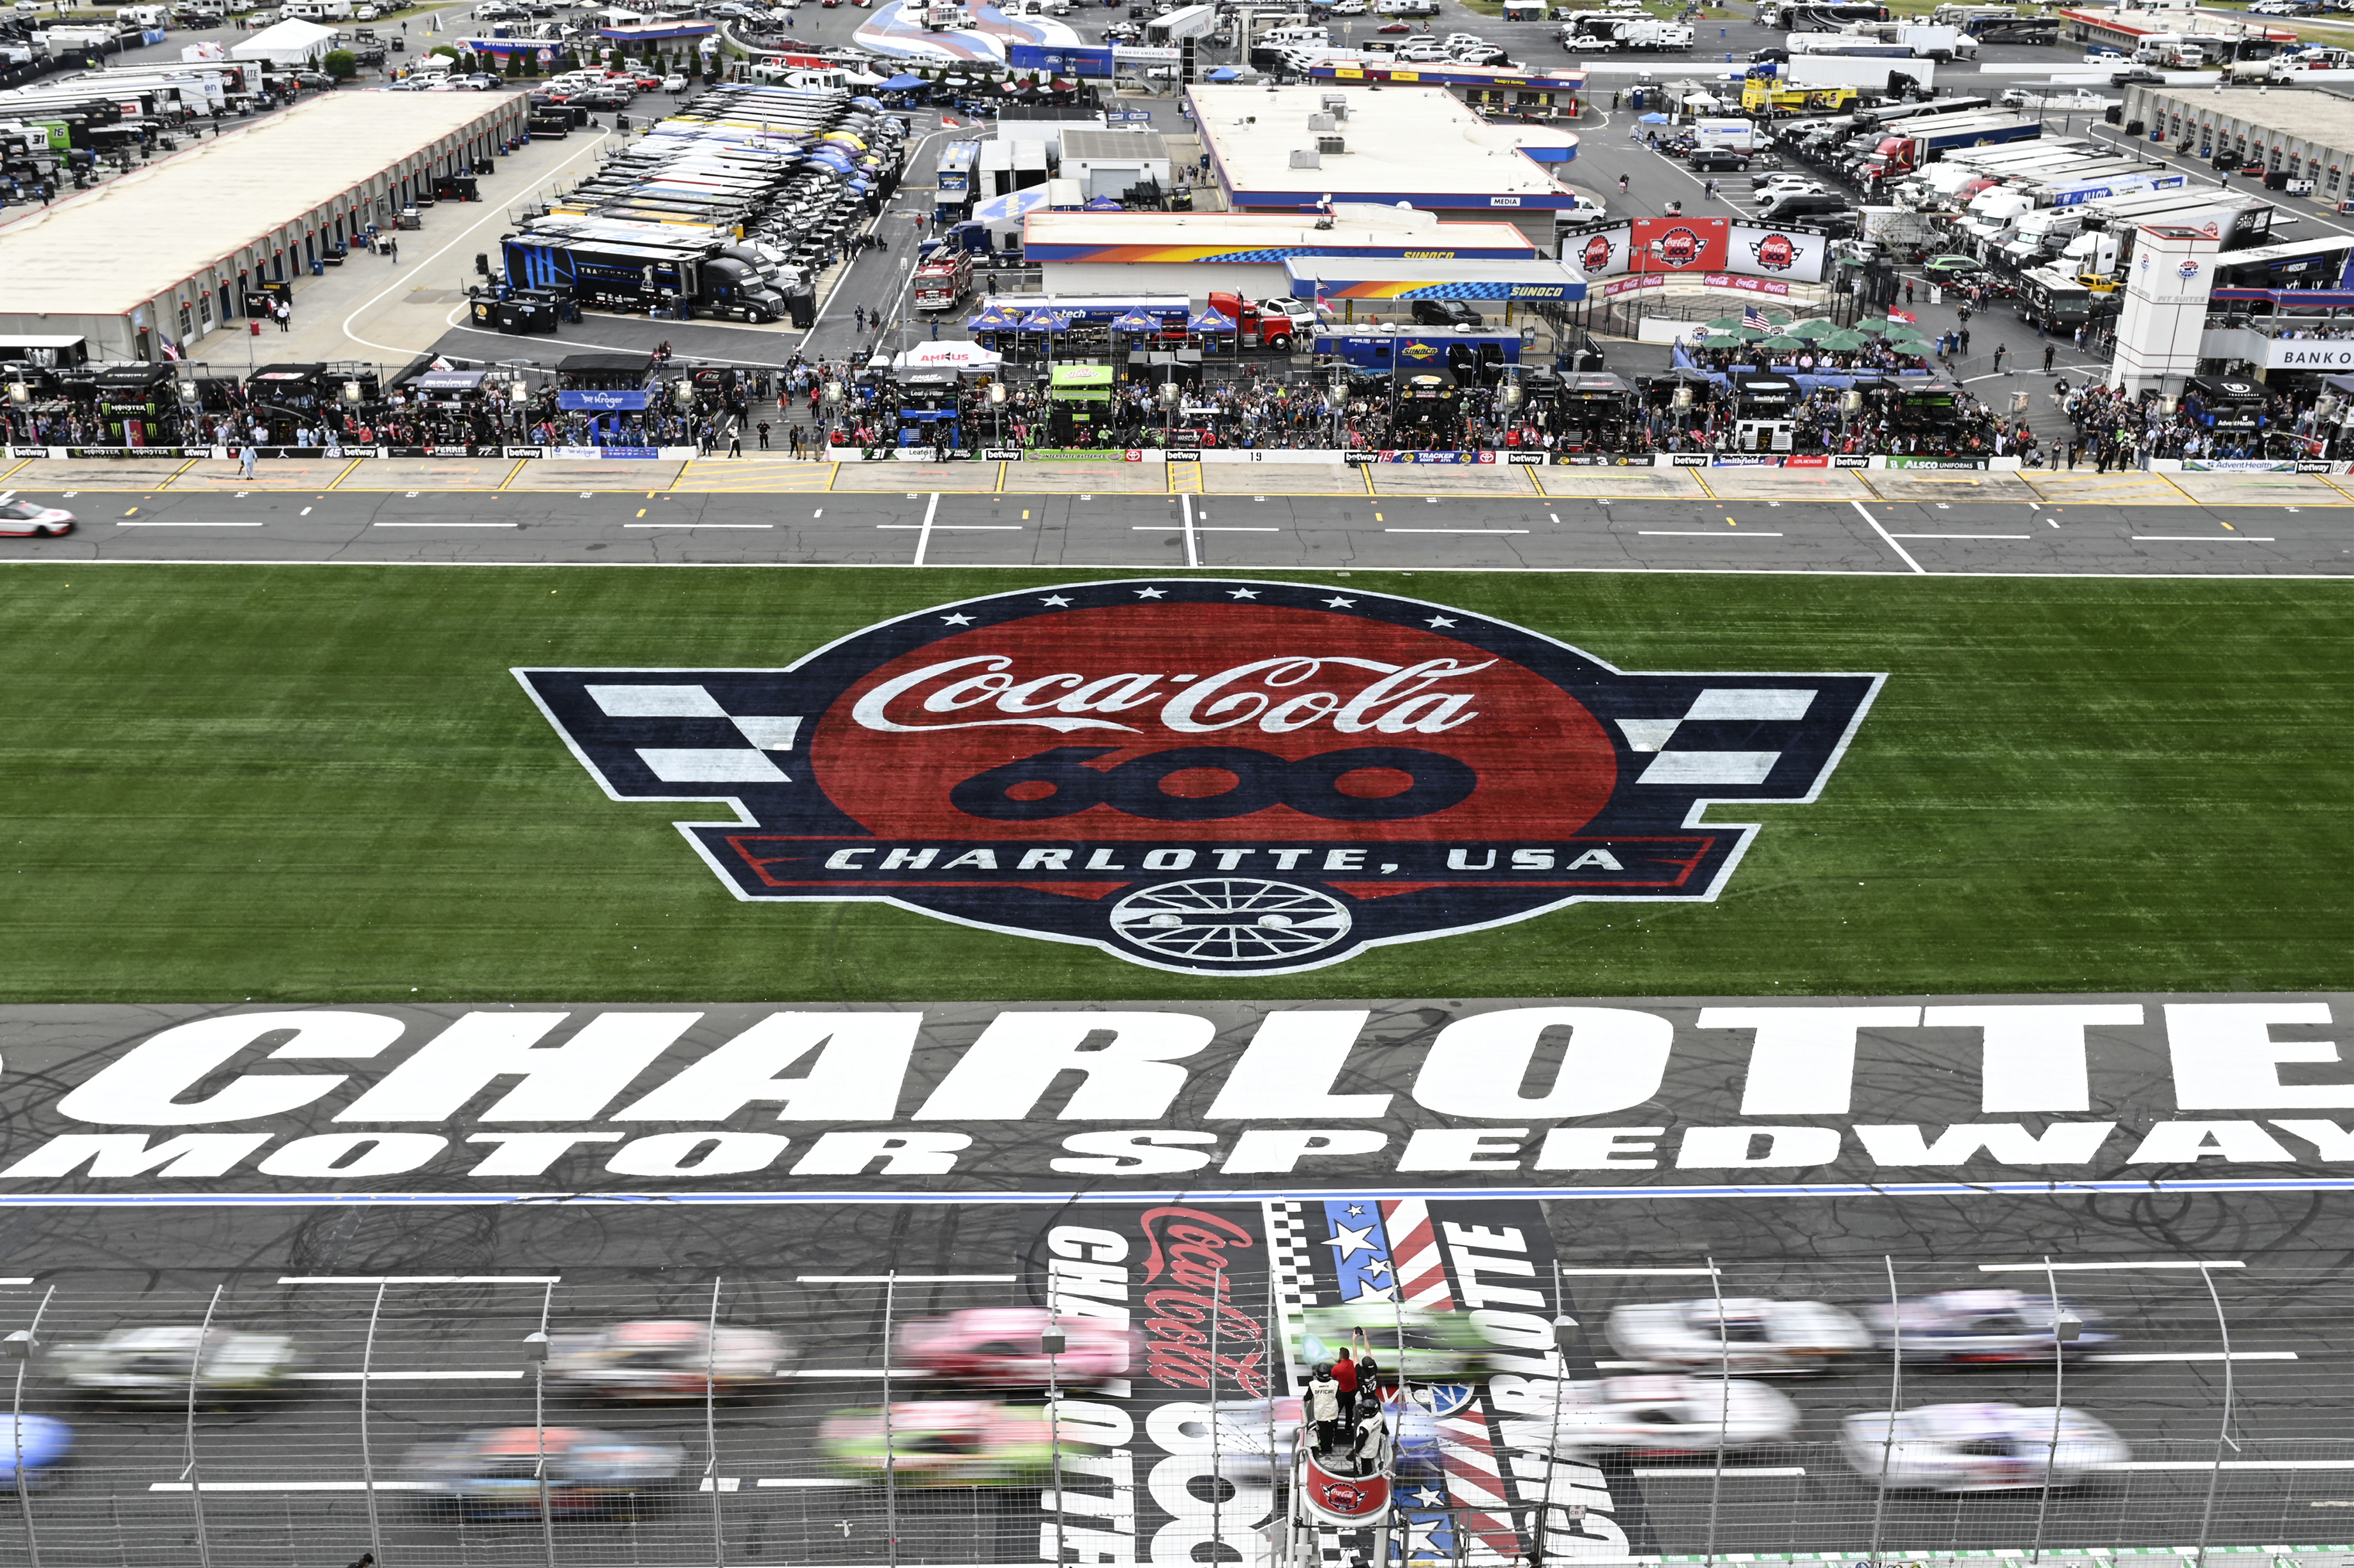 Ryan Blaney has high hopes for a win in Sunday's Coca-Cola 600 in Charlotte  - Auto Racing Digest